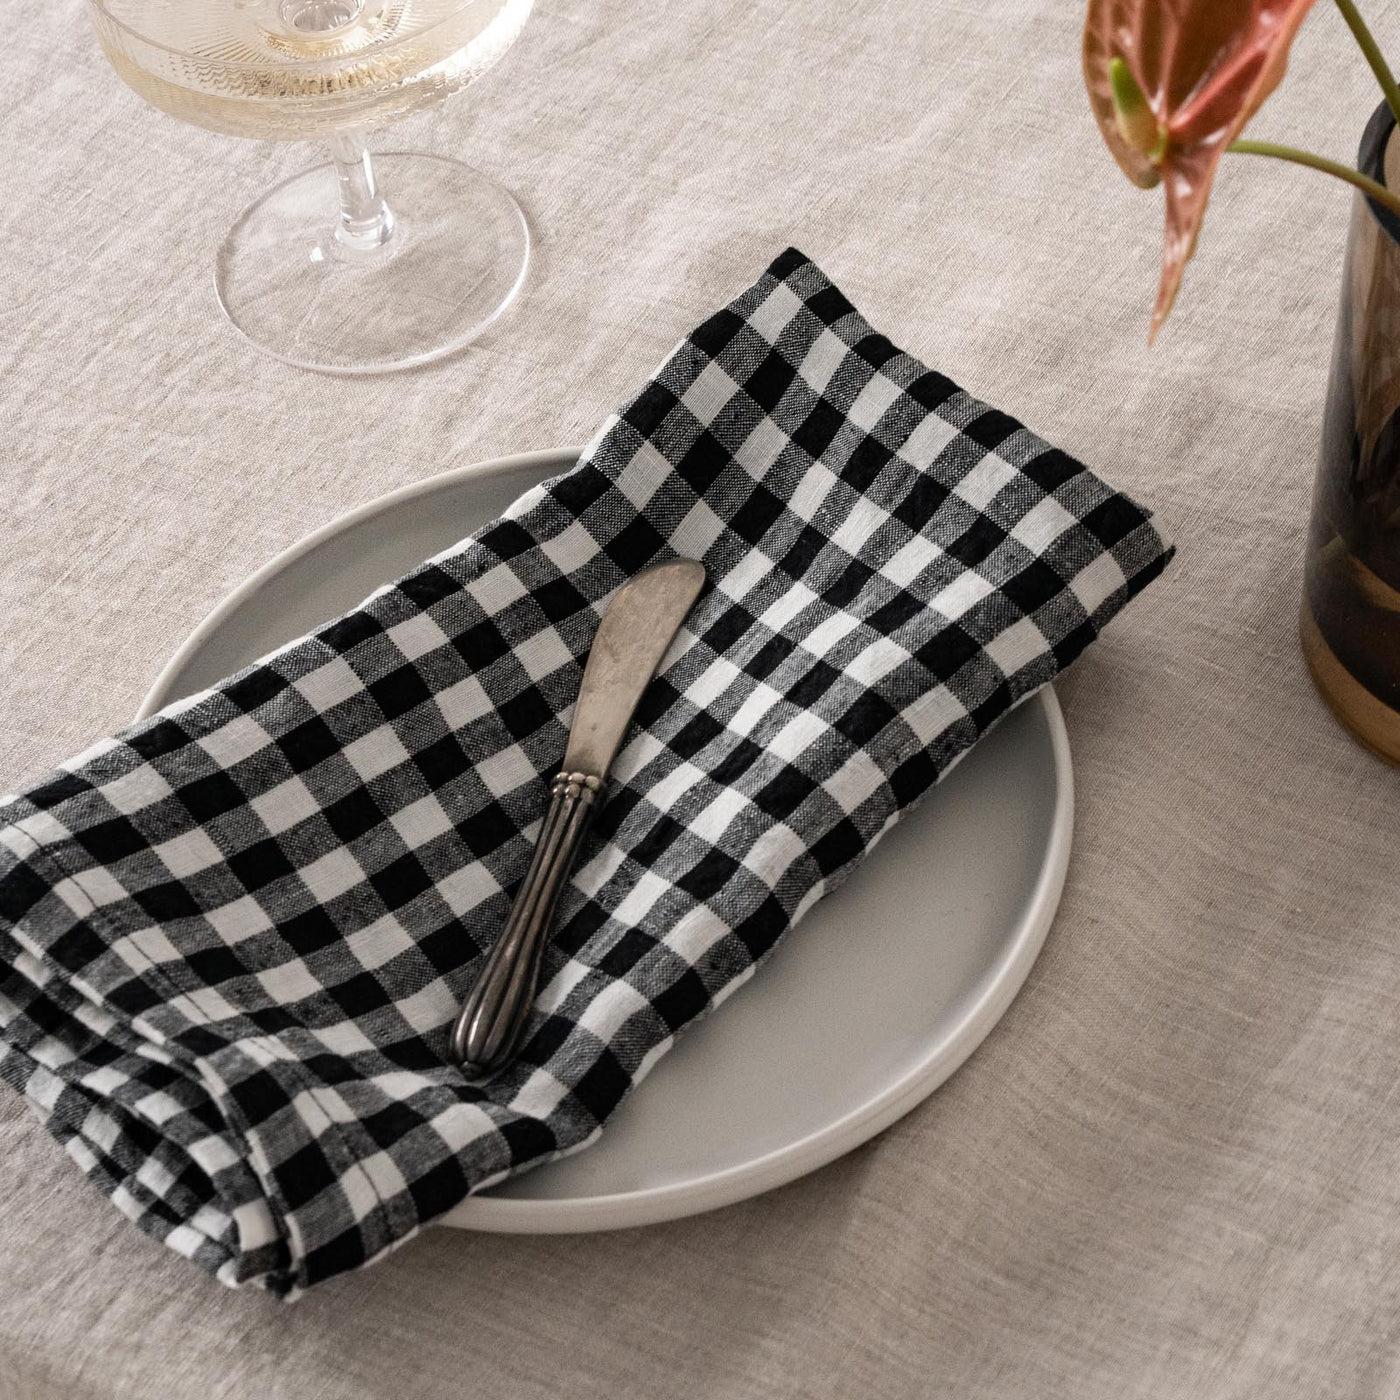 French Flax Linen Napkins (Set of 4) in Charcoal Gingham